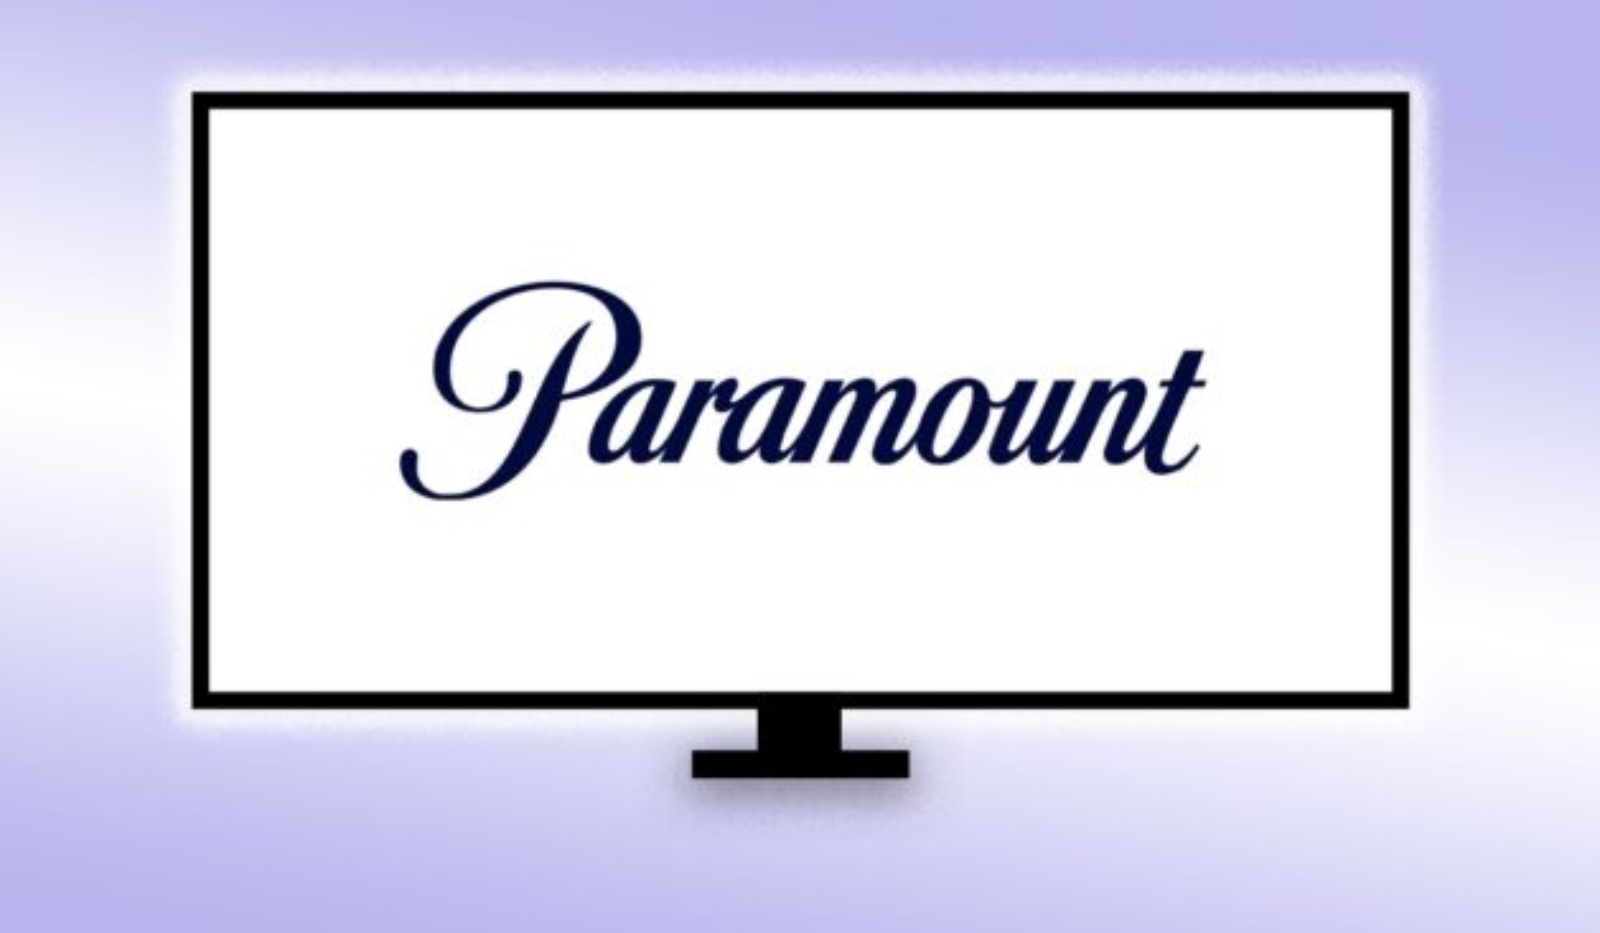 Paramount, Paramount+, paramount advertising, magnite, CTV, connected TV, ad tech, advertisers, magnite streaming, programmatic advertising, consumer experience, real-time, CTV inventory, Conduit, streaming platform, clean data, frequency management, unified, FreeWheel, scalability, interoperability, integration, SSP, supply side platform, programmatic, ad tracking, ad performance, video ad inventory, unique bids, marketing, advertising, Google Ad Manager, ad buying, programmers, ad selling platform, EyeQ, direct integration,